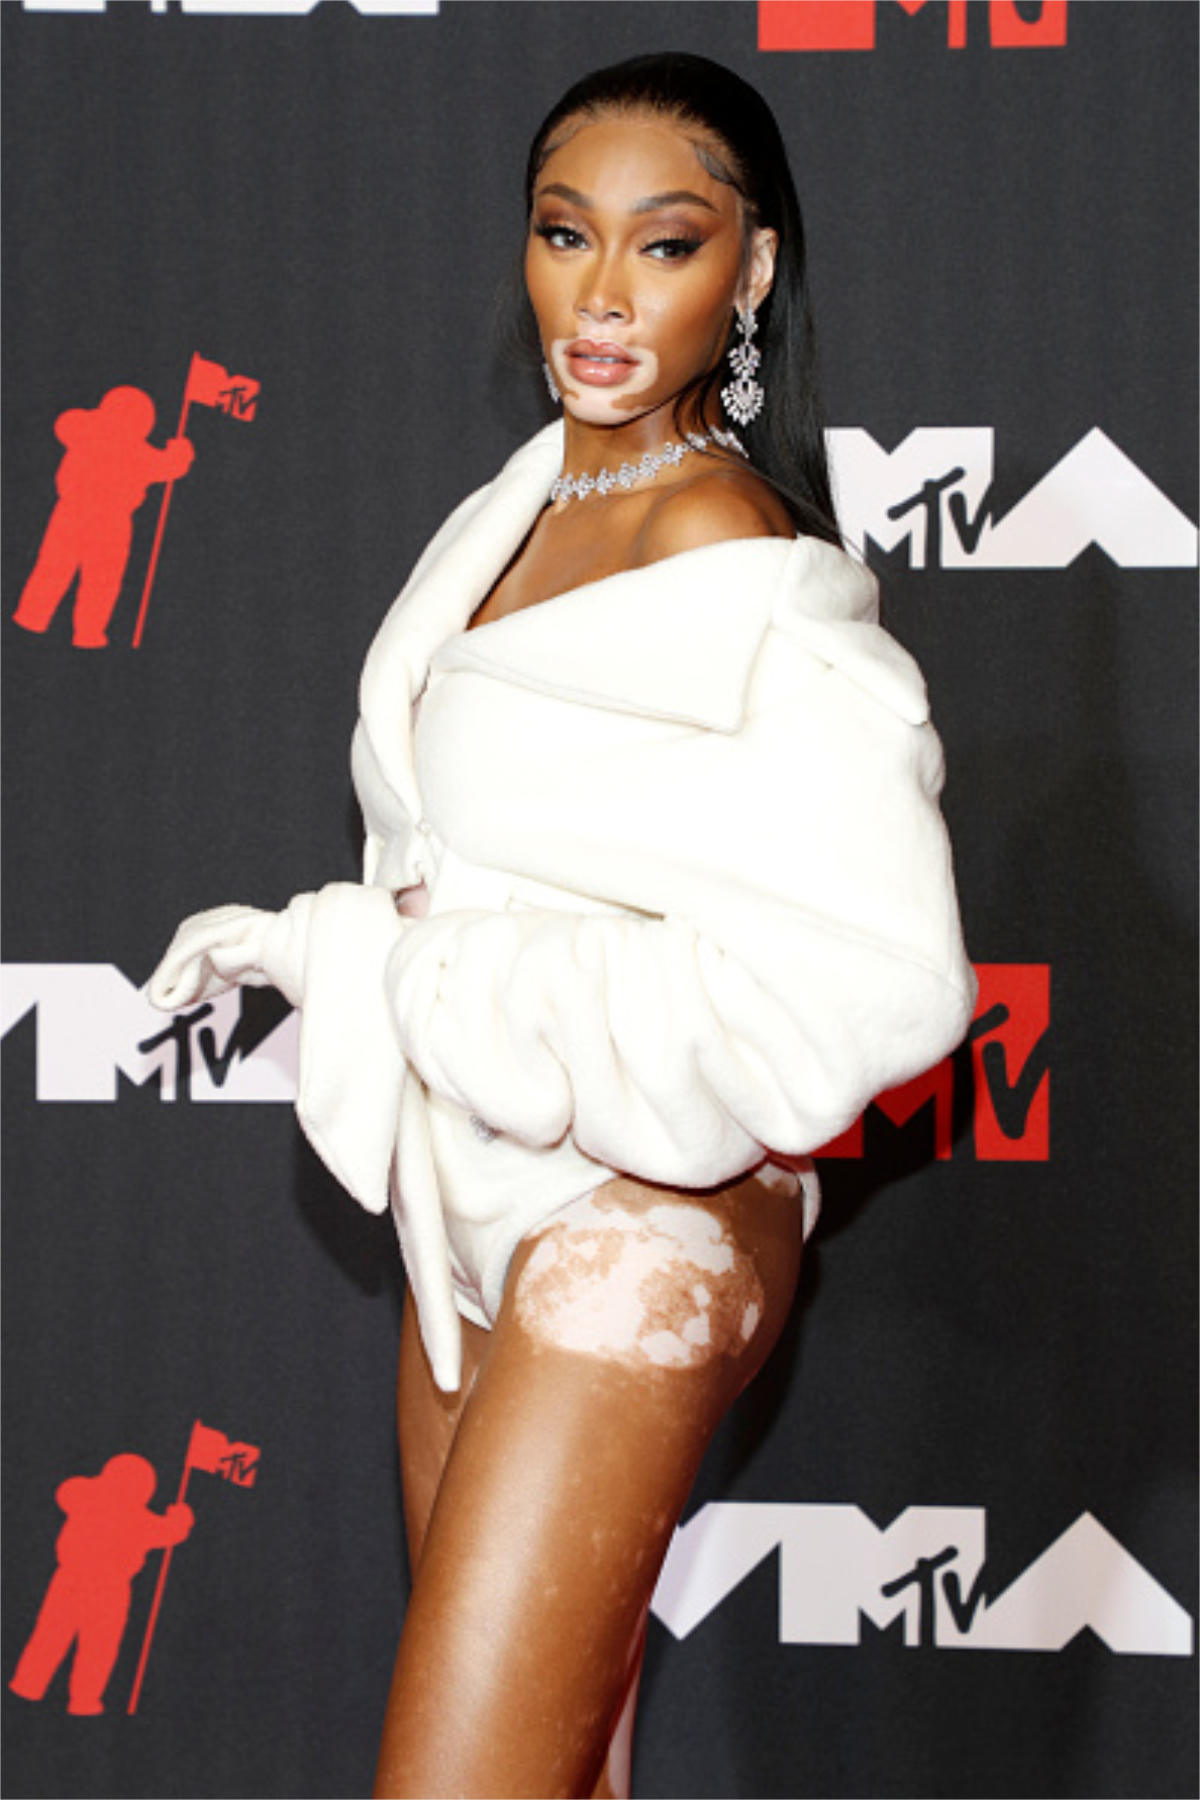 Winnie Harlow Shined On The Red Carpet In Messika During MTV VMAs 2021